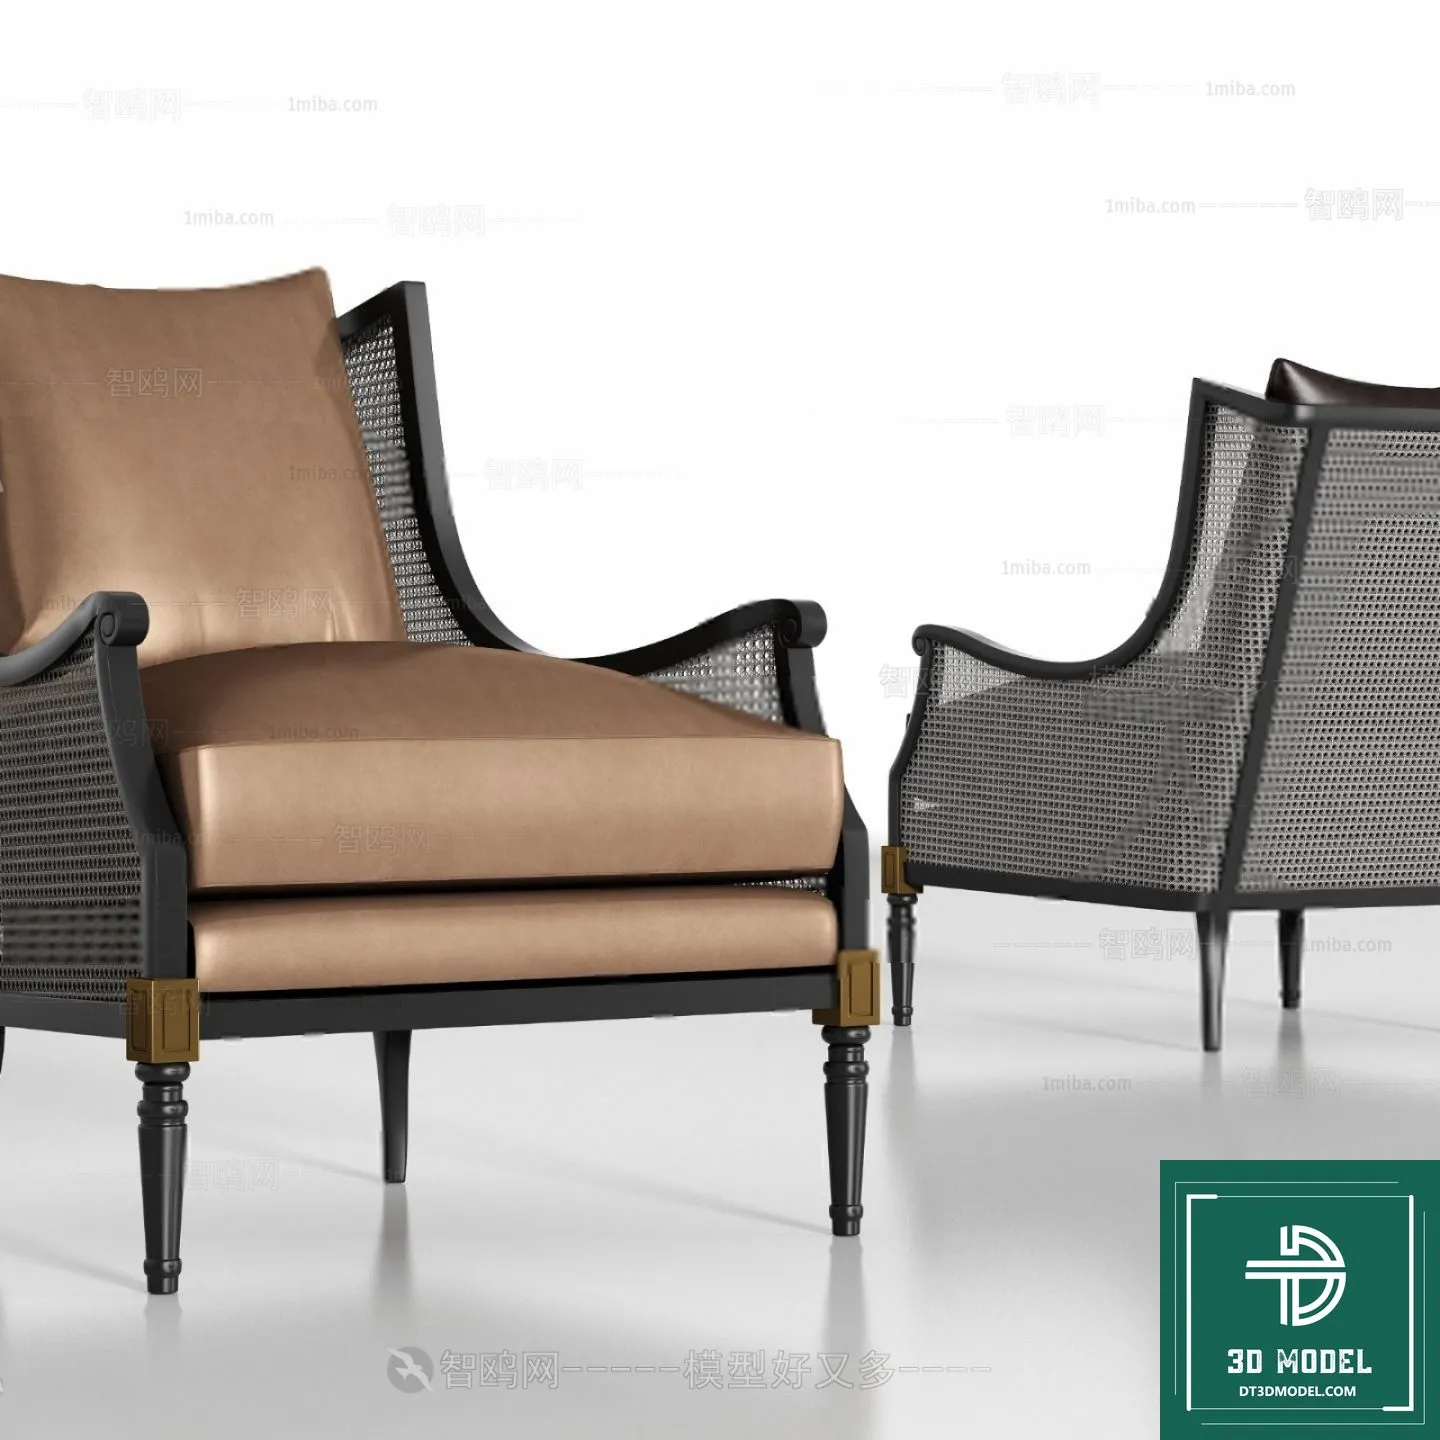 INDOCHINE STYLE – 3D MODELS – 889